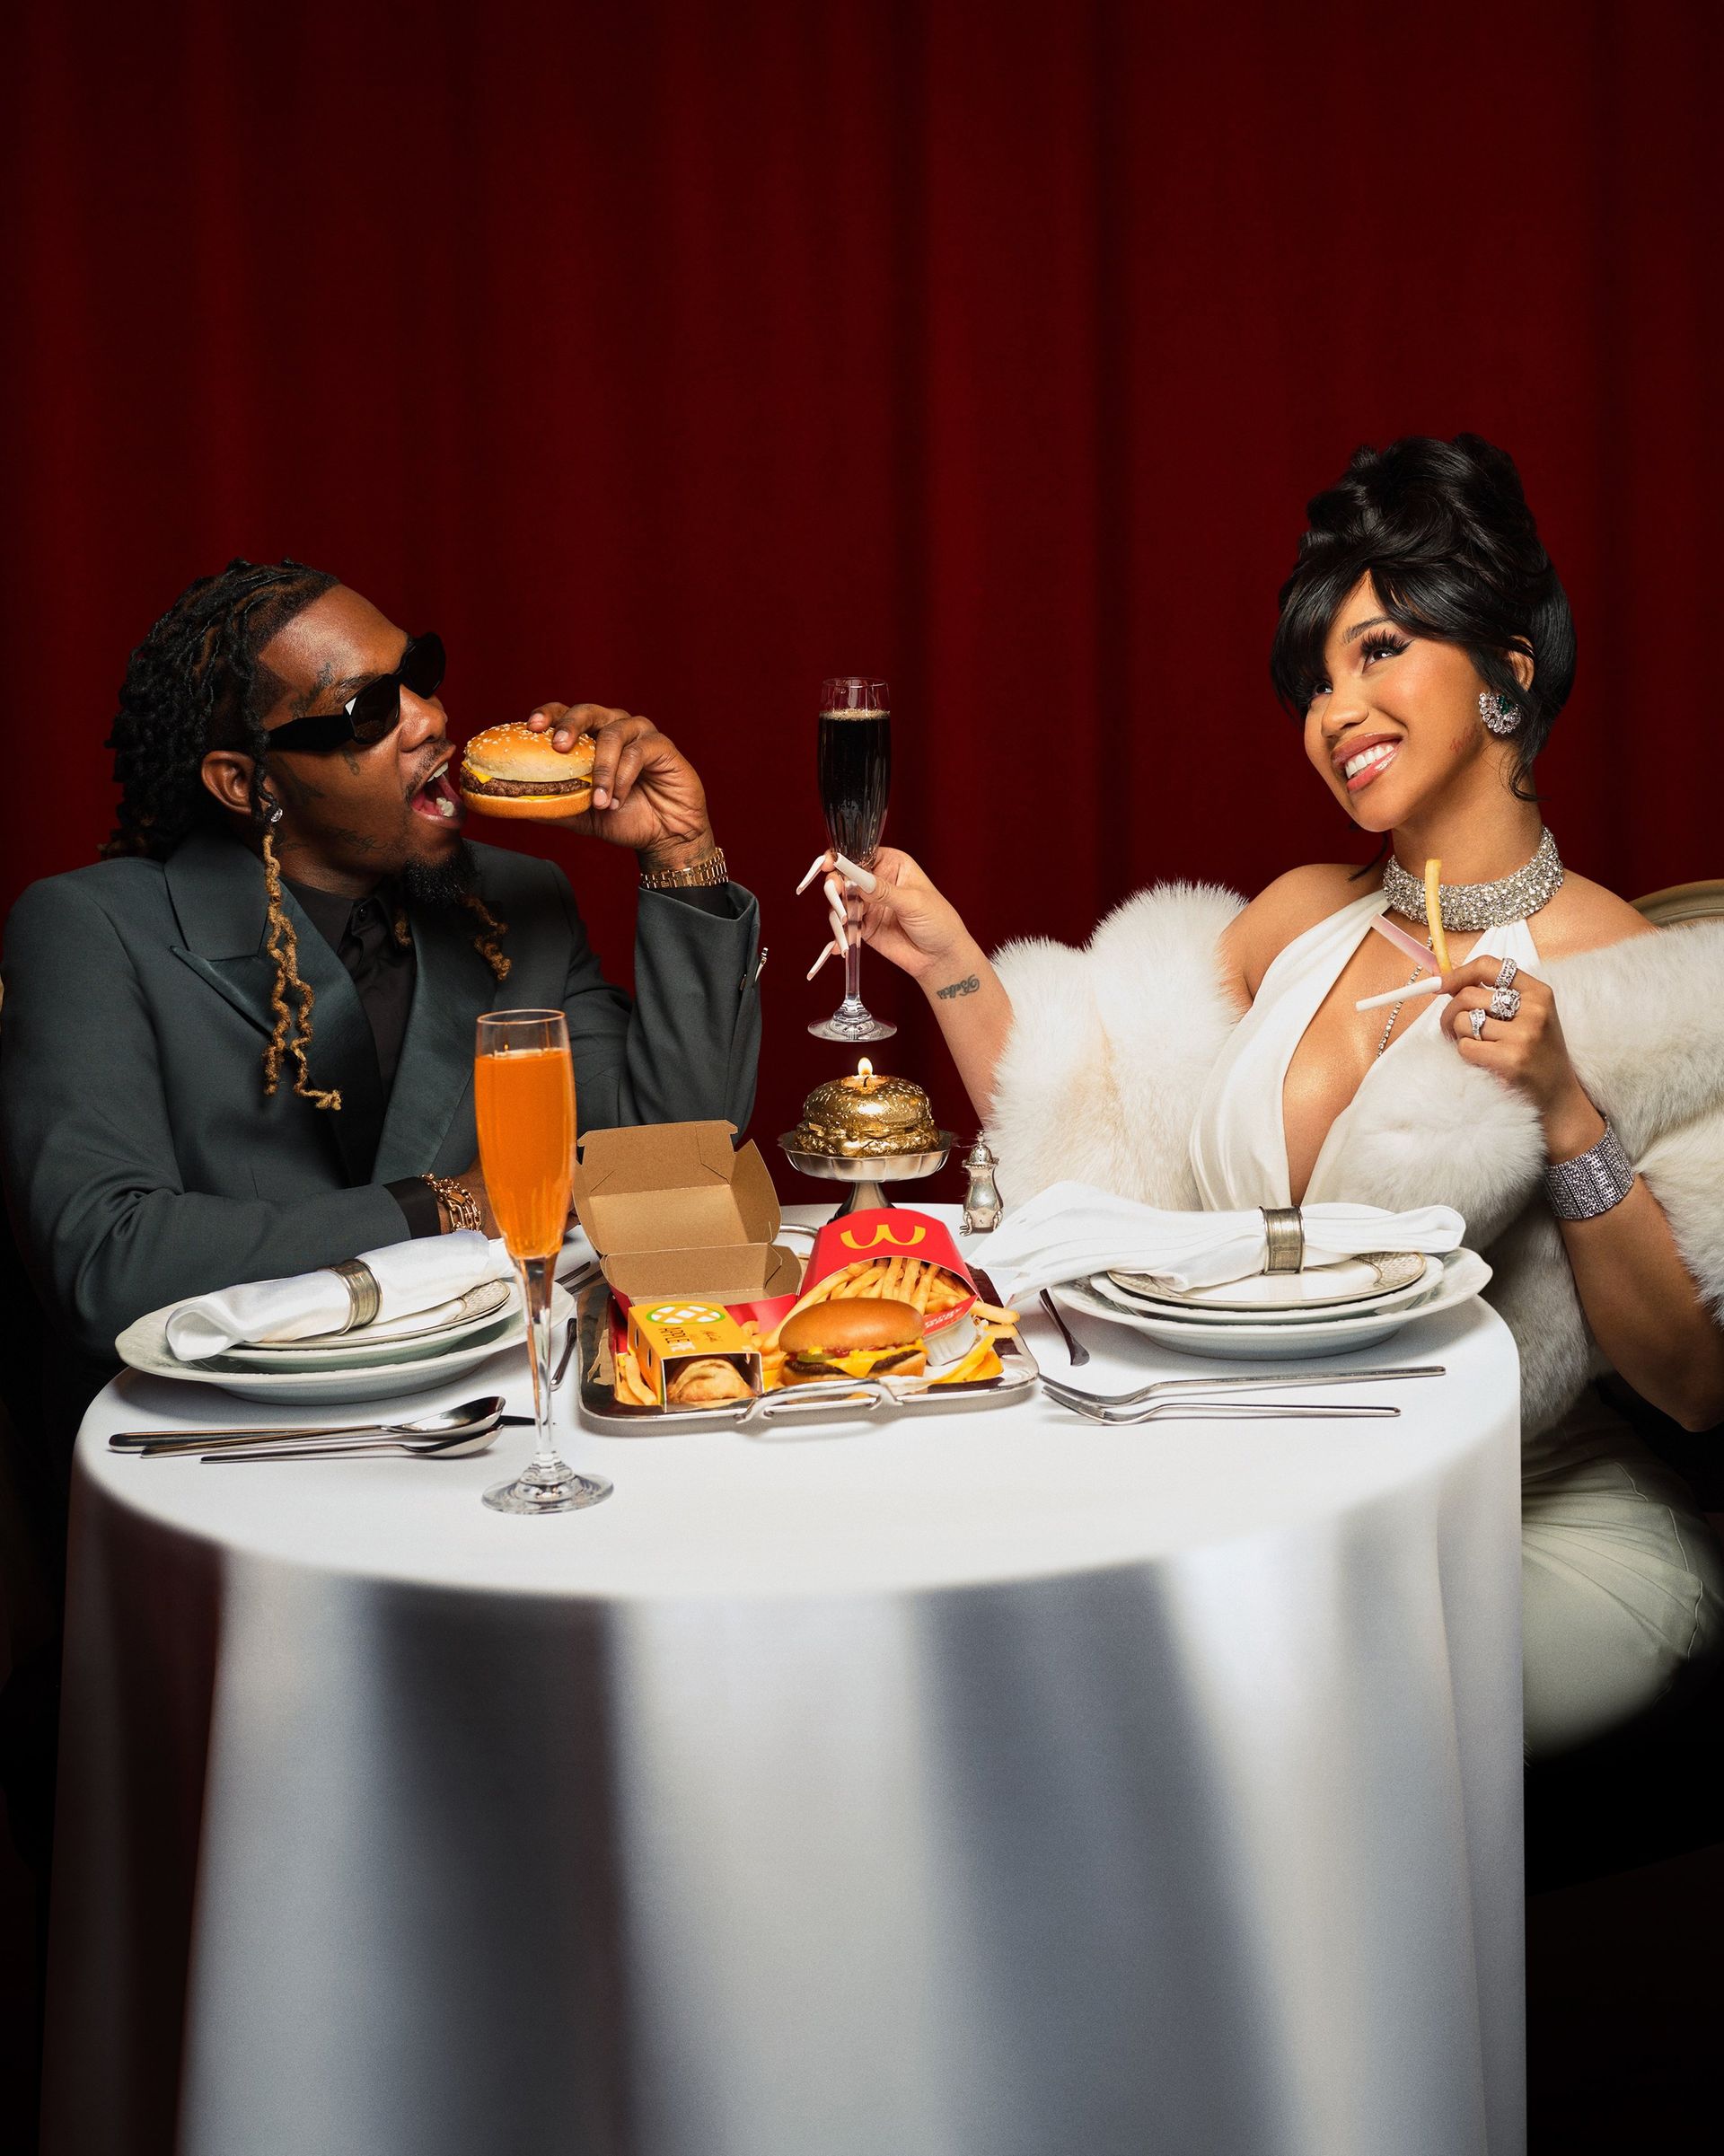 Cardi B and Offset’s McDonald’s meal has it all